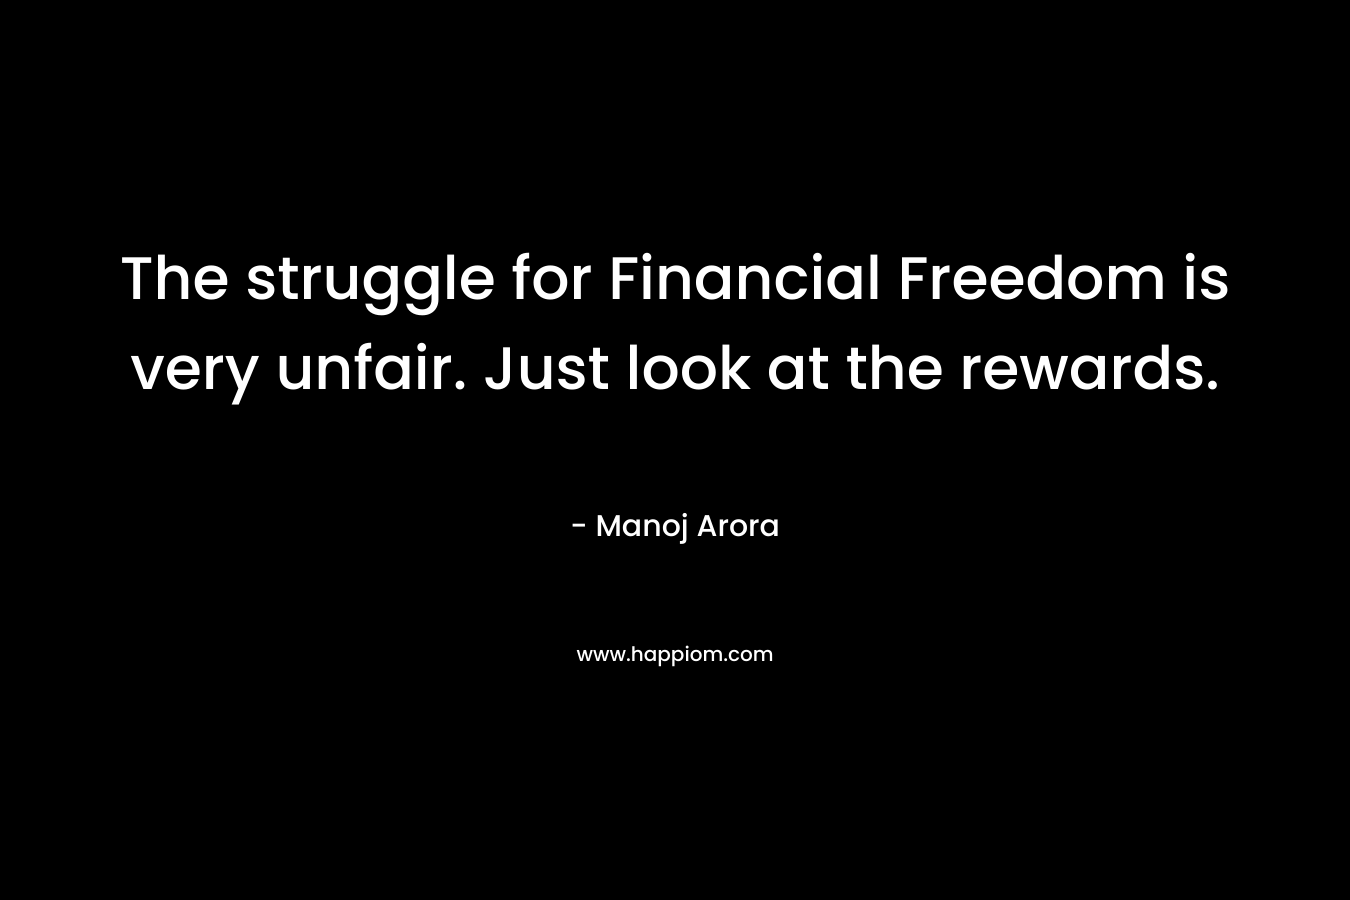 The struggle for Financial Freedom is very unfair. Just look at the rewards. – Manoj Arora